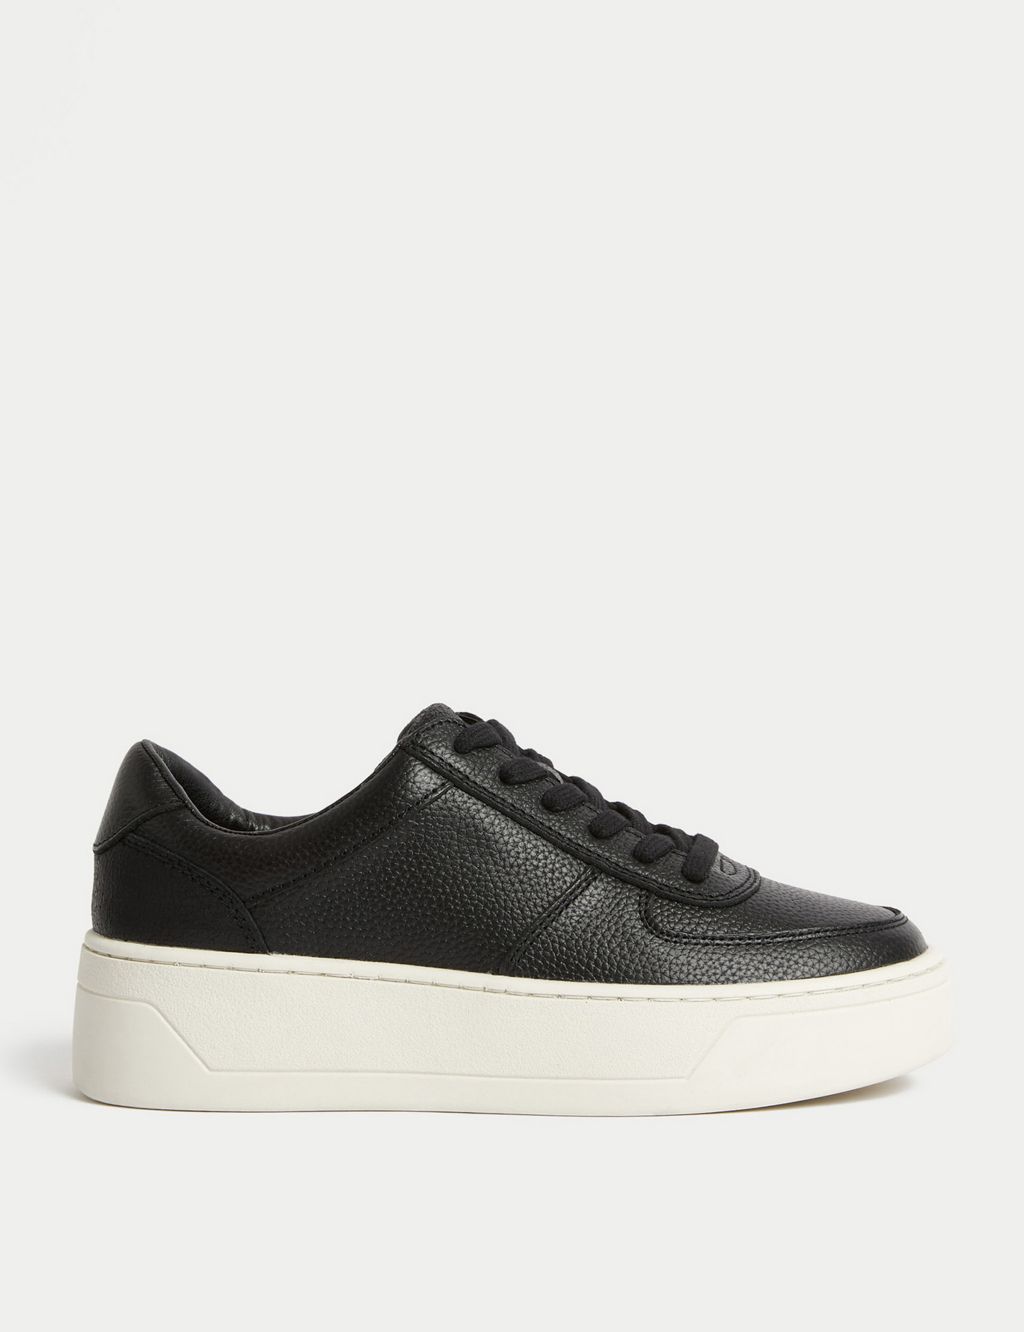 Leather Lace Up Chunky Trainers image 1